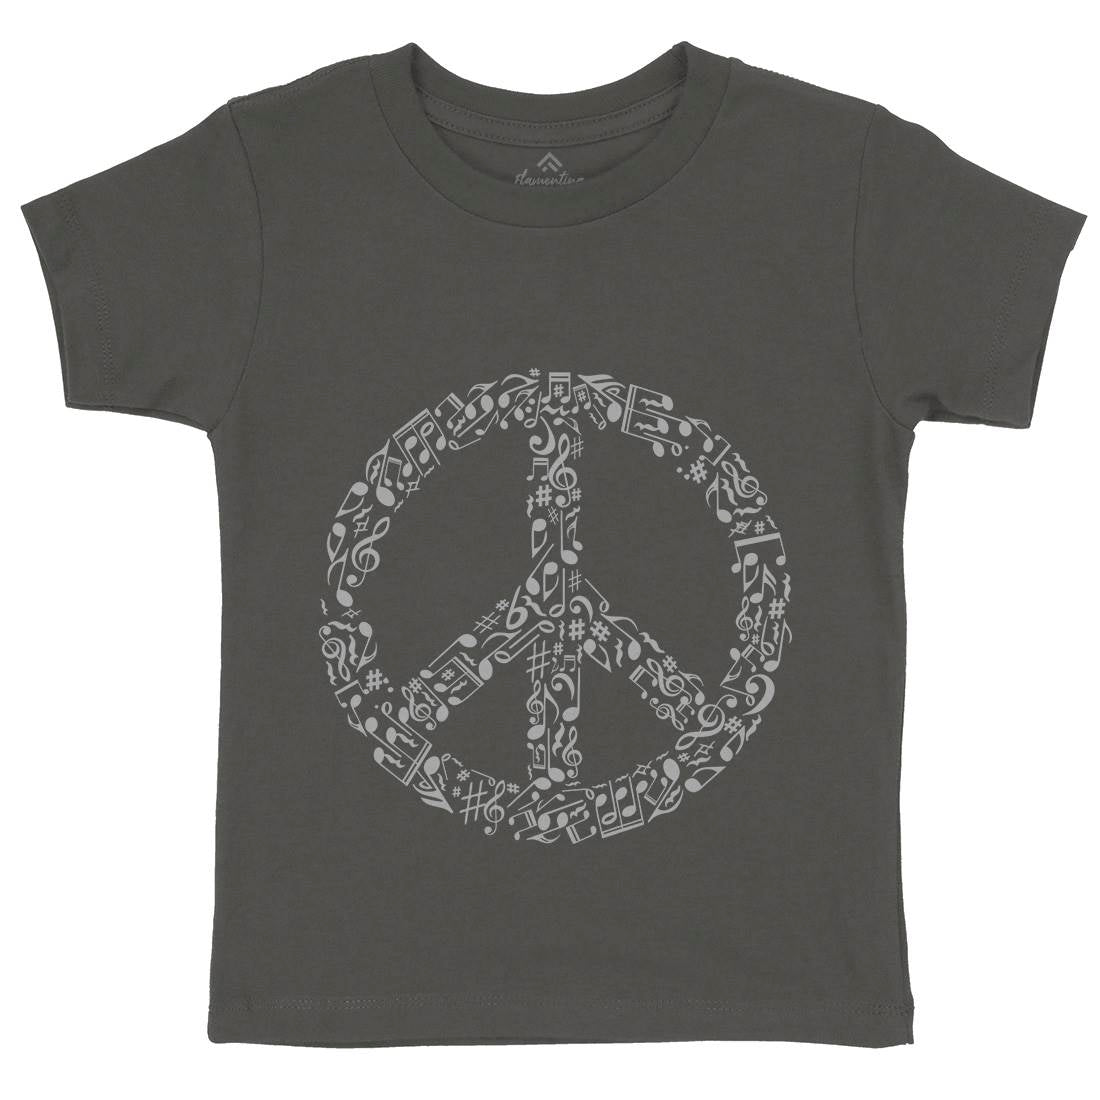 Rhyme In Kids Crew Neck T-Shirt Peace B072